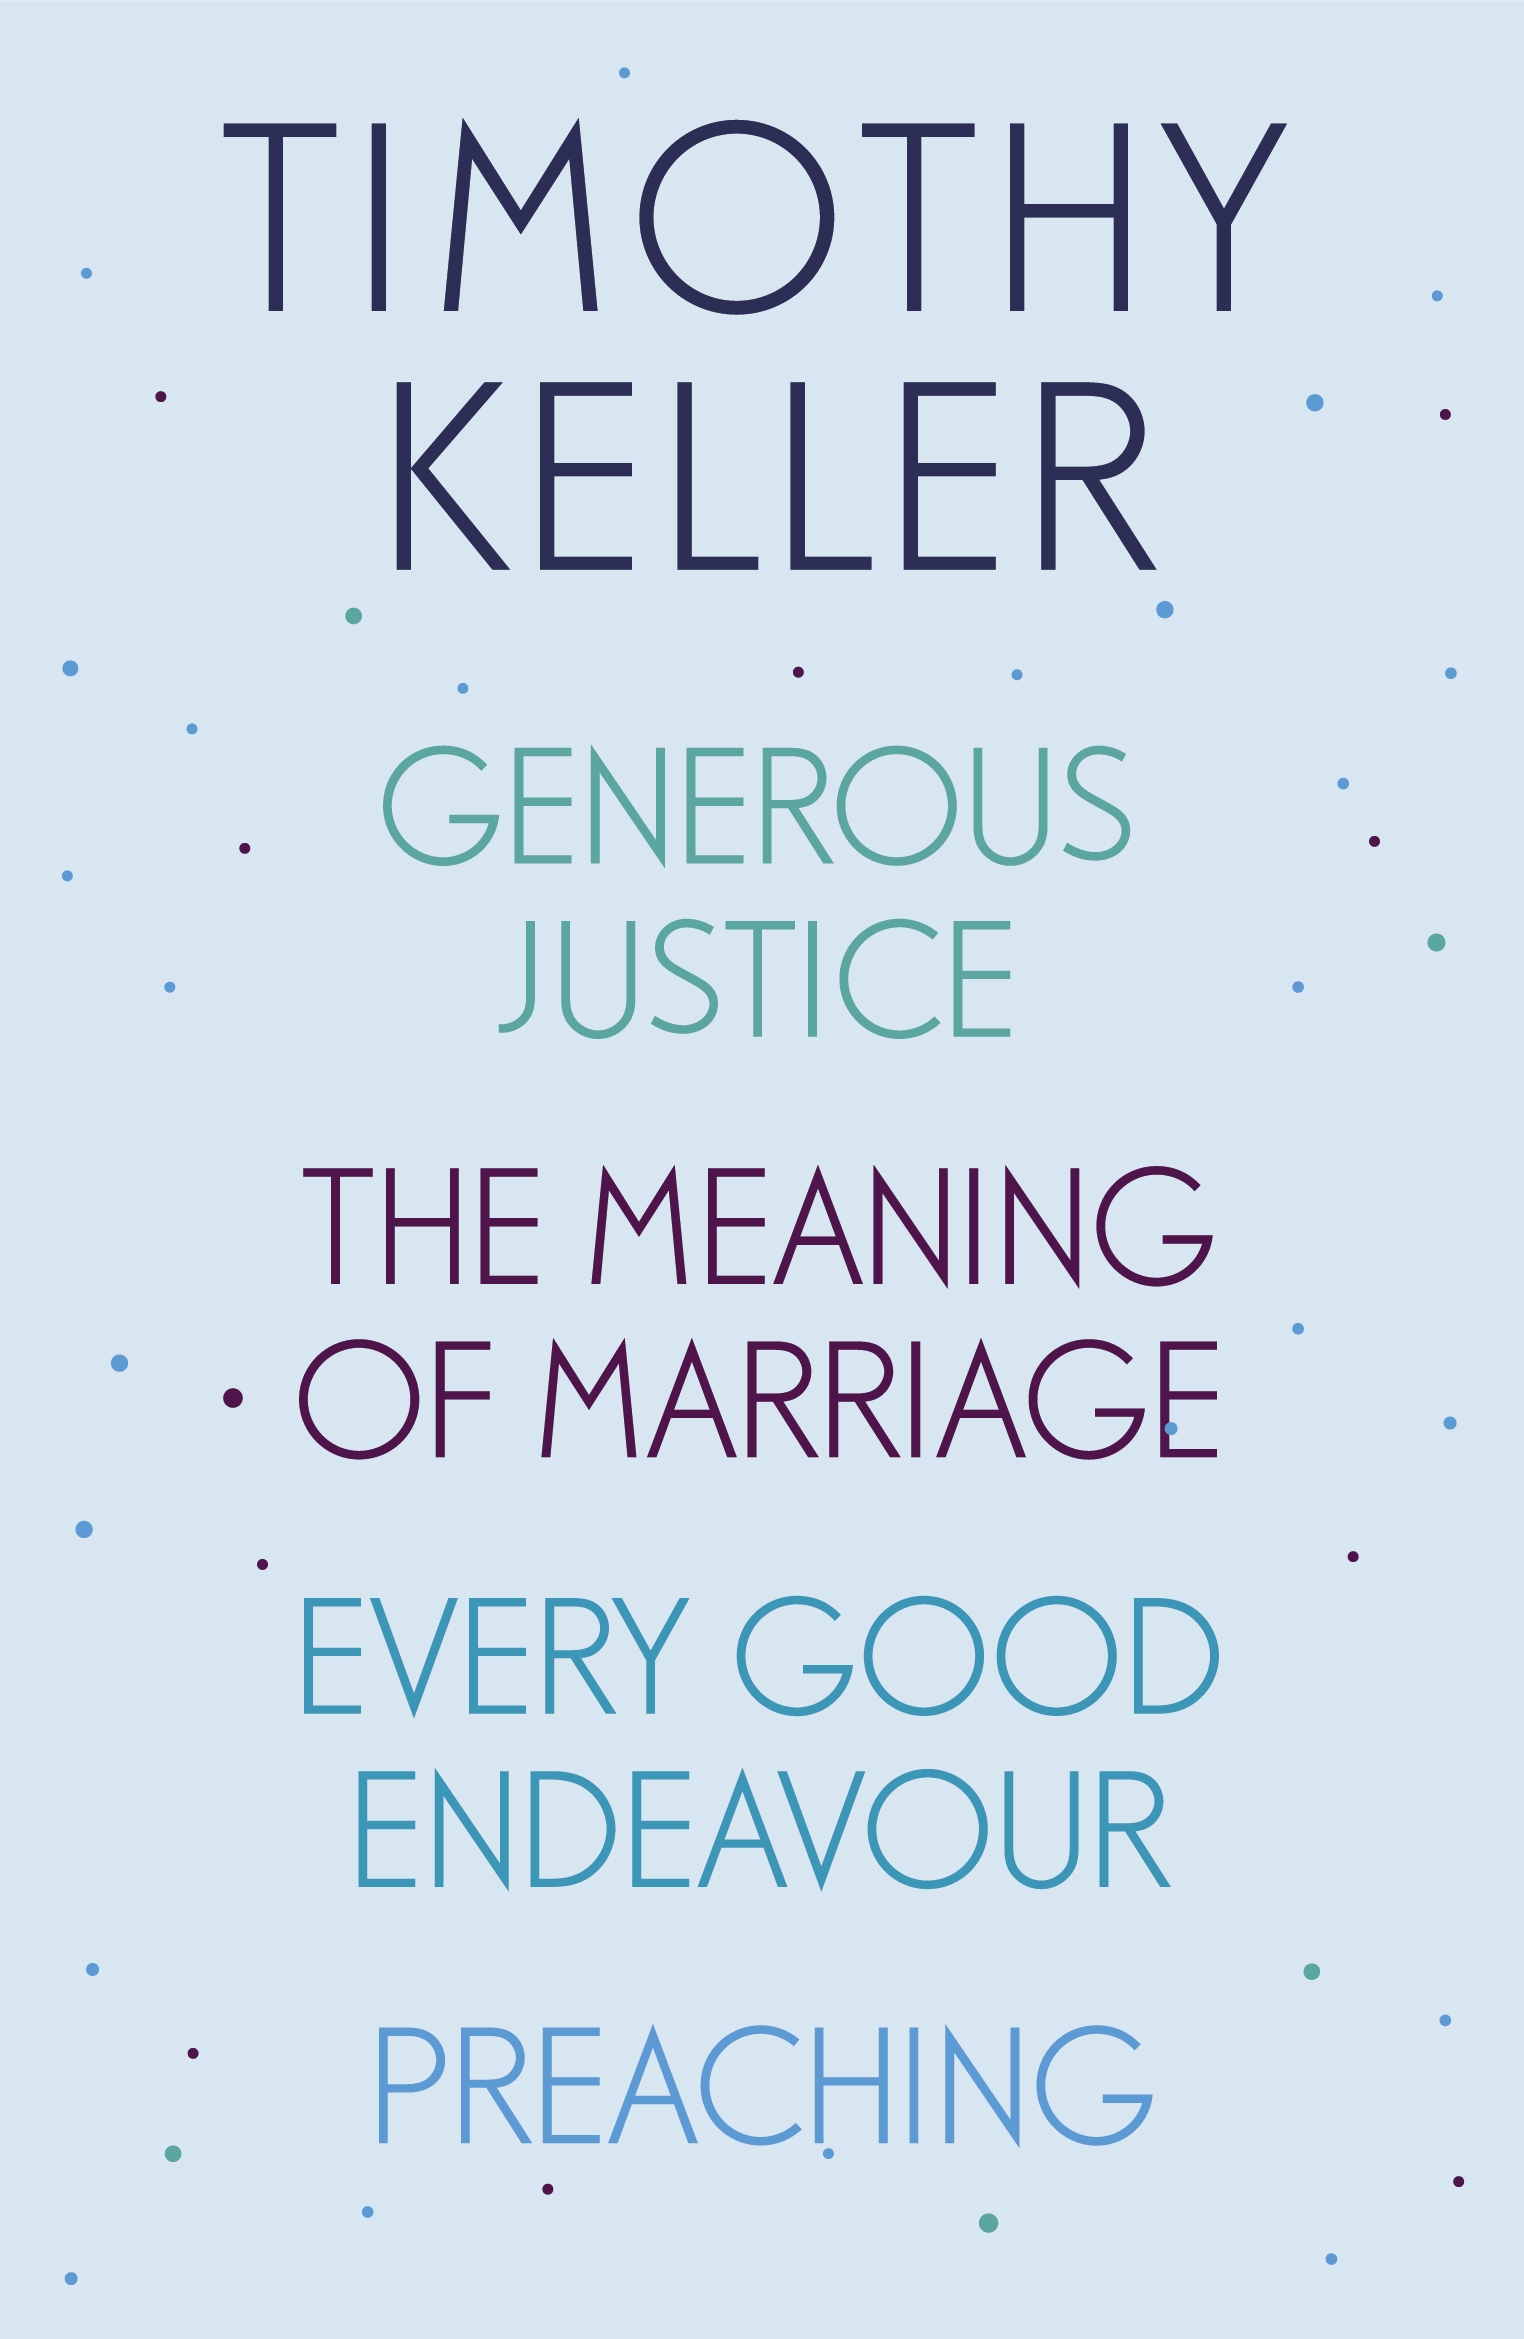 Timothy Keller: Generous Justice, The Meaning of Marriage ...
